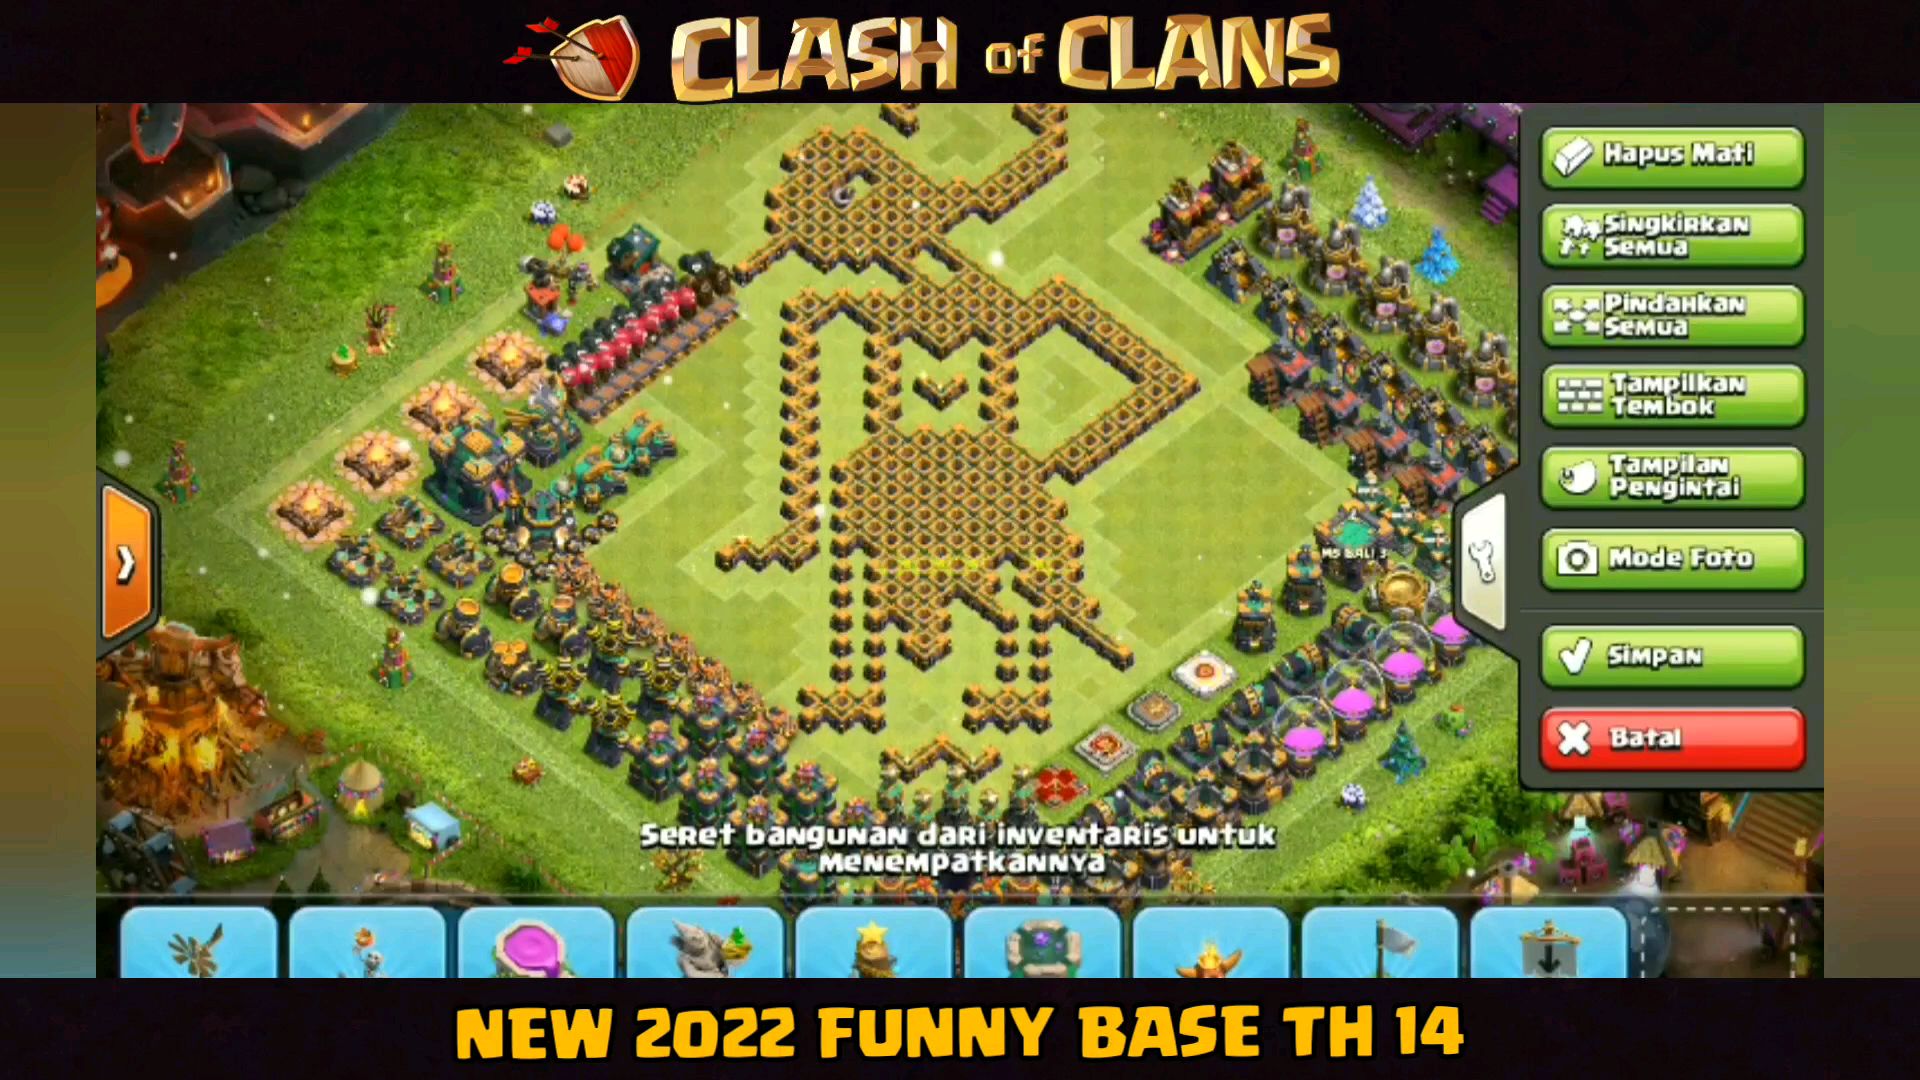 NEW 2022 Funny Base TH 14 Clash oh Clans - Bstation